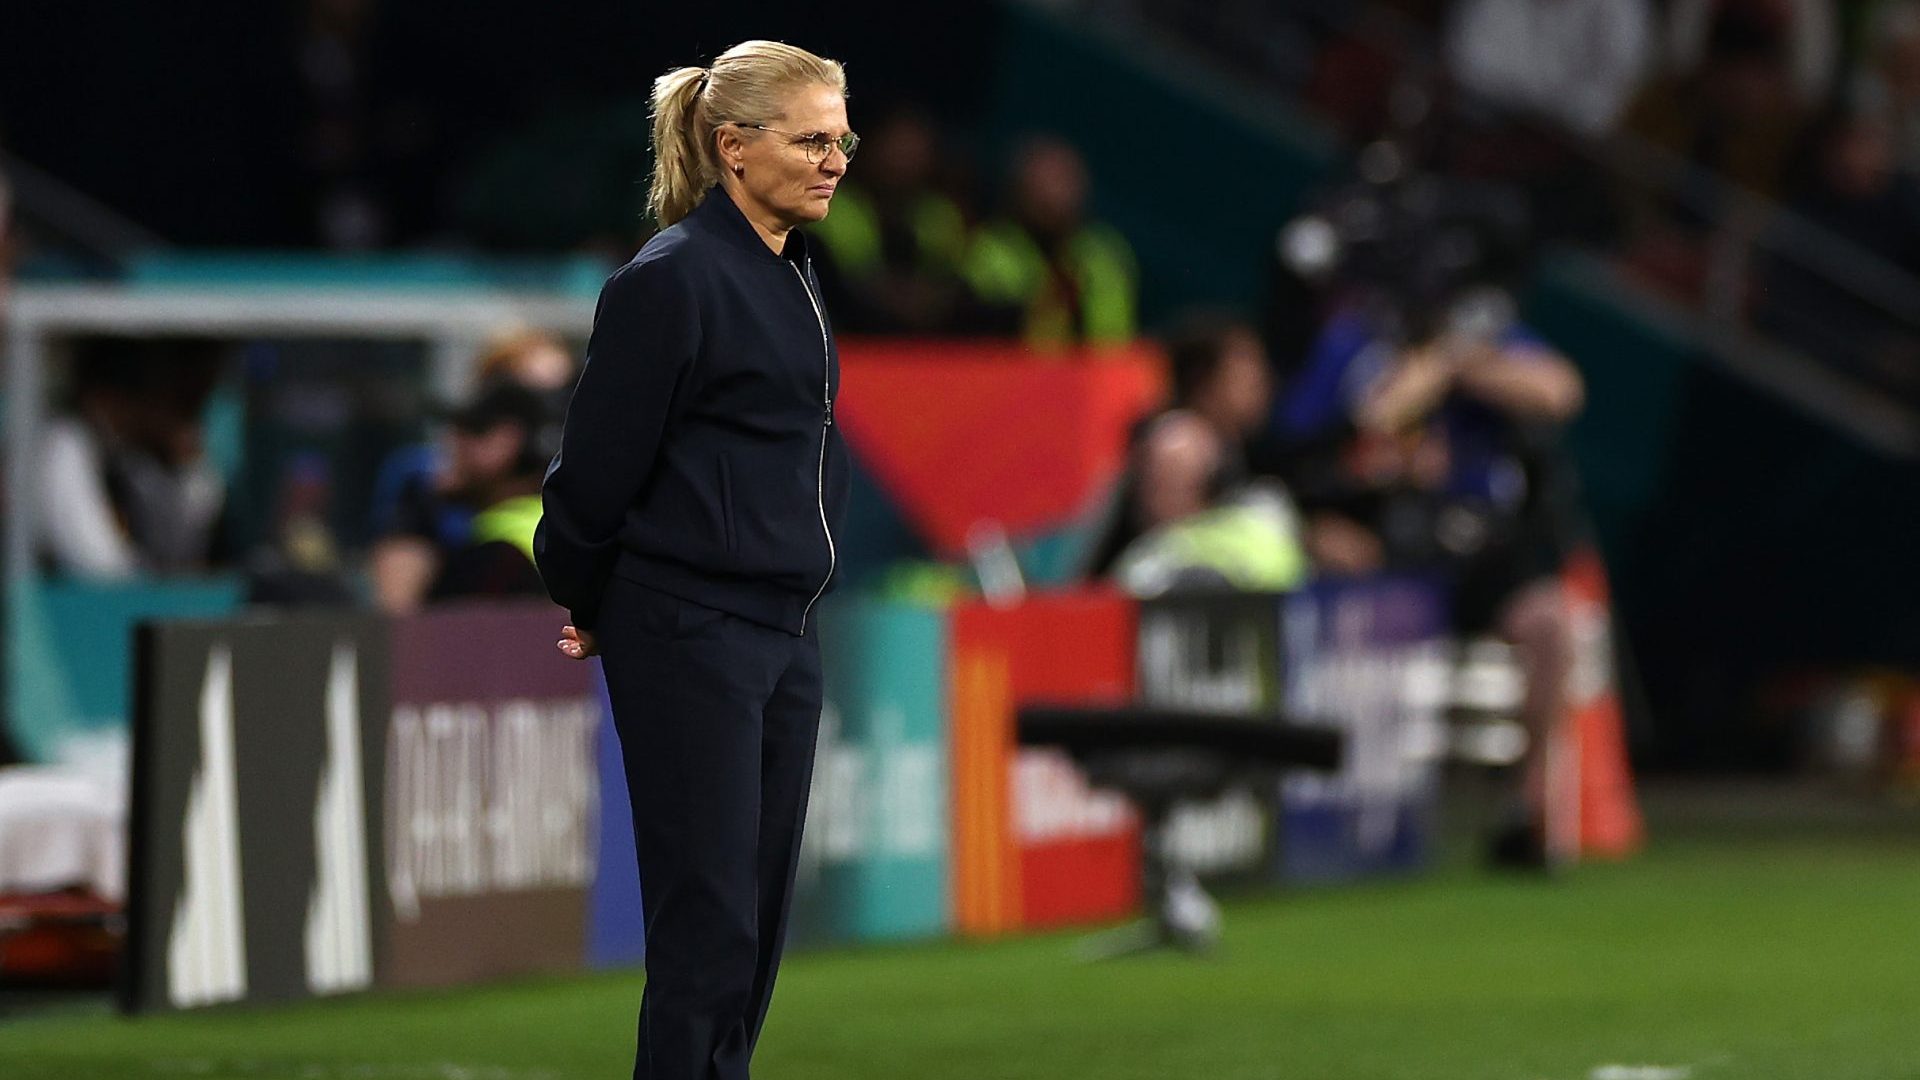 Sarina Wiegman, head coach of England, looks on during the Women's World Cup game between England and Nigeria (Photo by Naomi Baker - The FA/The FA via Getty Images)